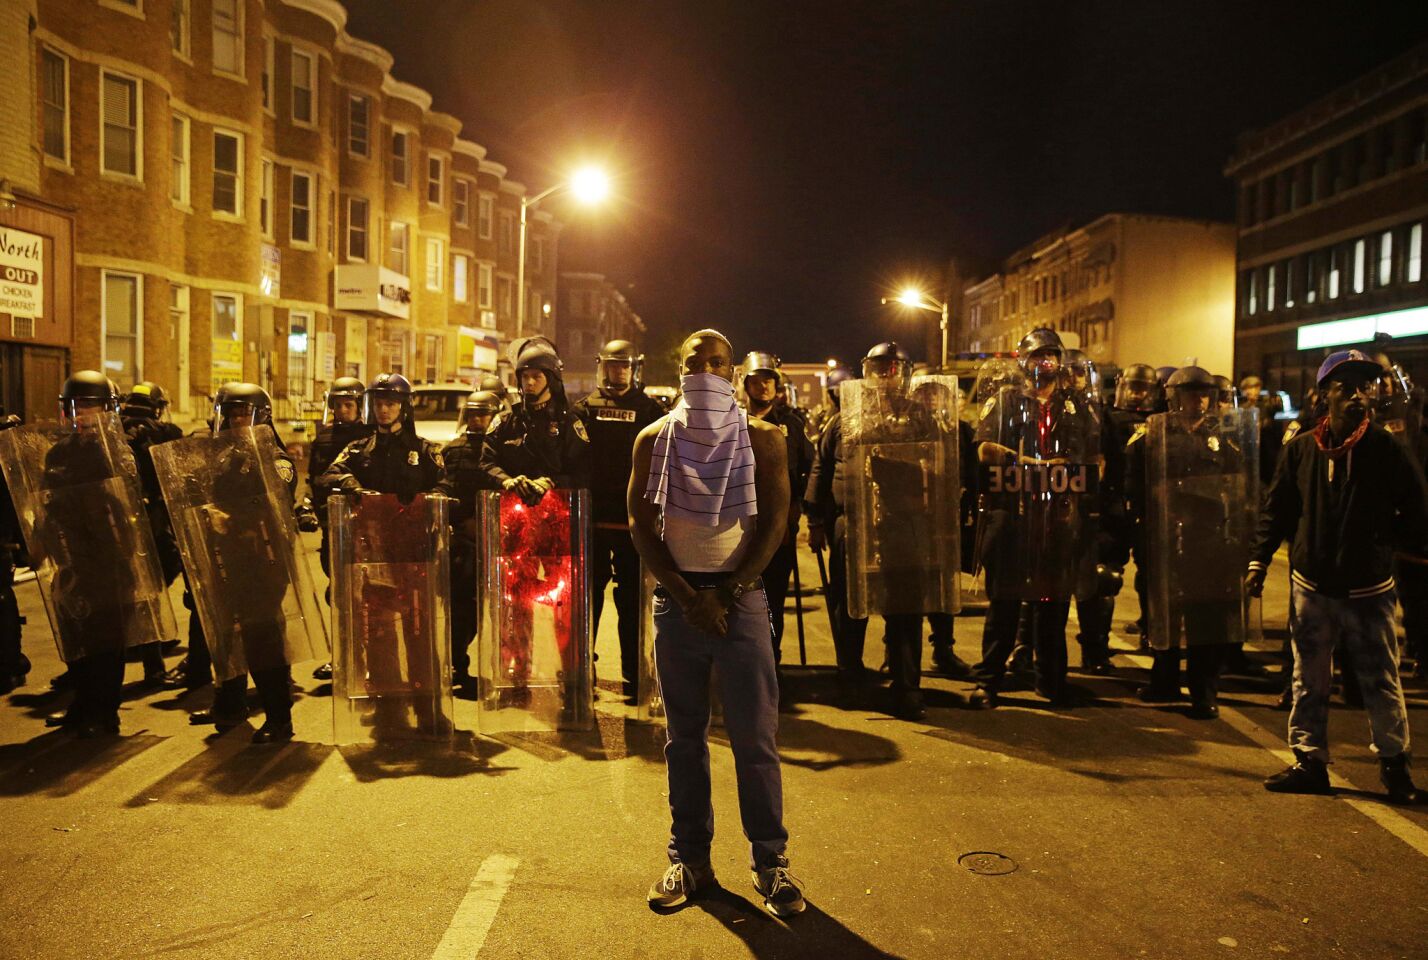 A man stands in front of a line of police officers in riot gear ahead of a 10 p.m. curfew on Tuesday in Baltimore.